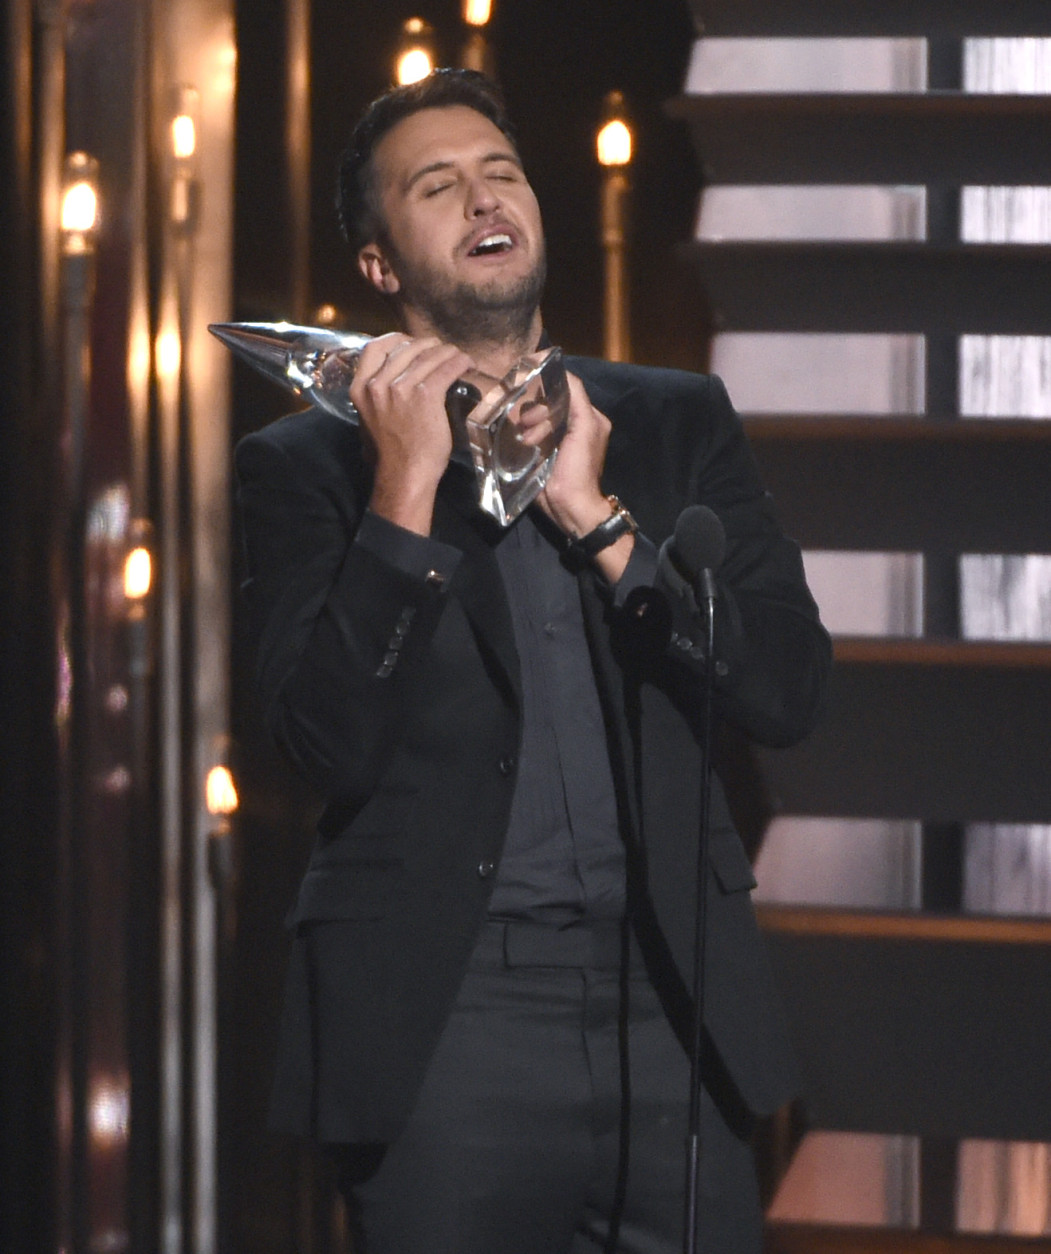 Luke Bryan accepts the award for entertainer of the year at the 49th annual CMA Awards at the Bridgestone Arena on Wednesday, Nov. 4, 2015, in Nashville, Tenn. (Photo by Chris Pizzello/Invision/AP)